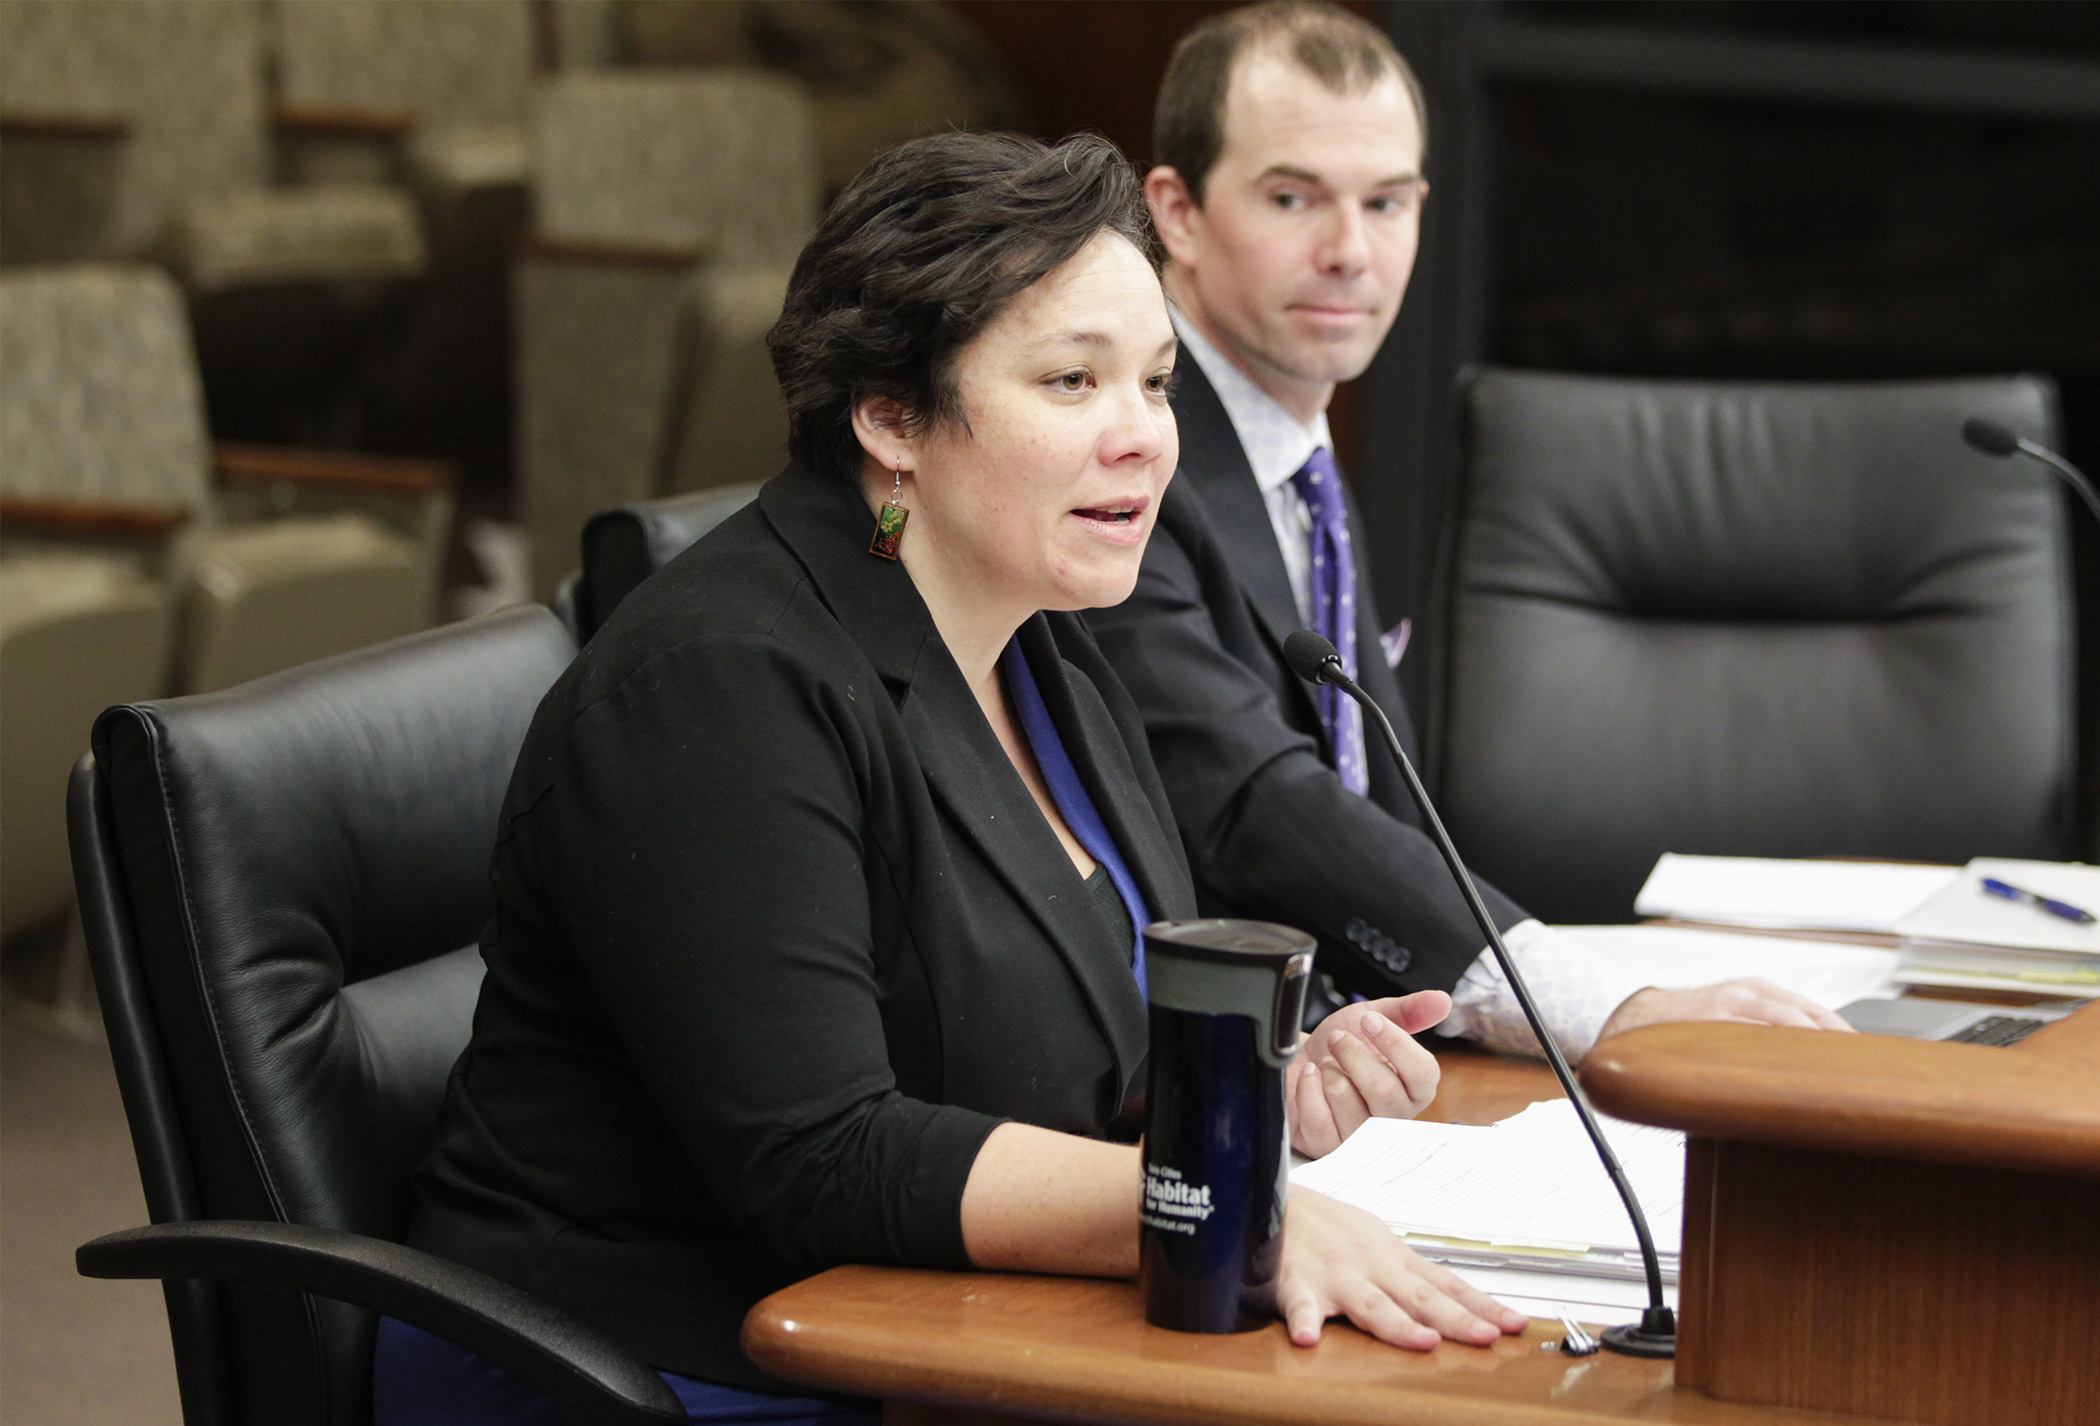 Human Rights Commissioner Rebecca Lucero presents her department’s budget request to the House Judiciary Finance and Civil Law Division Feb. 26. Photo by Paul Battaglia